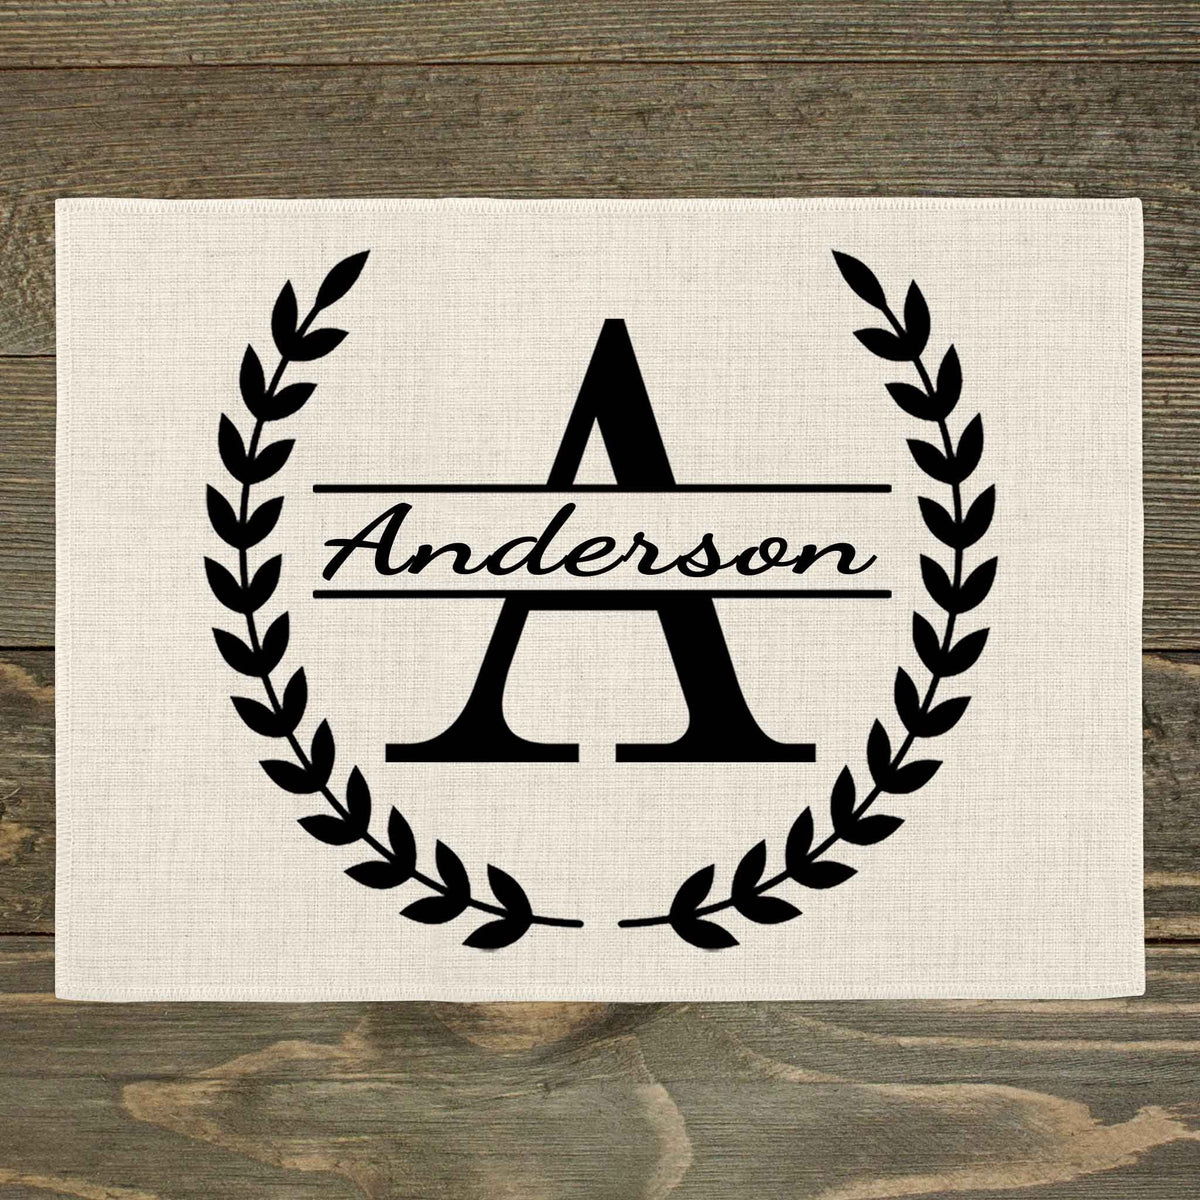 Custom Placemats | Personalized Dining and Serving | Laurel Wreath Split Monogram